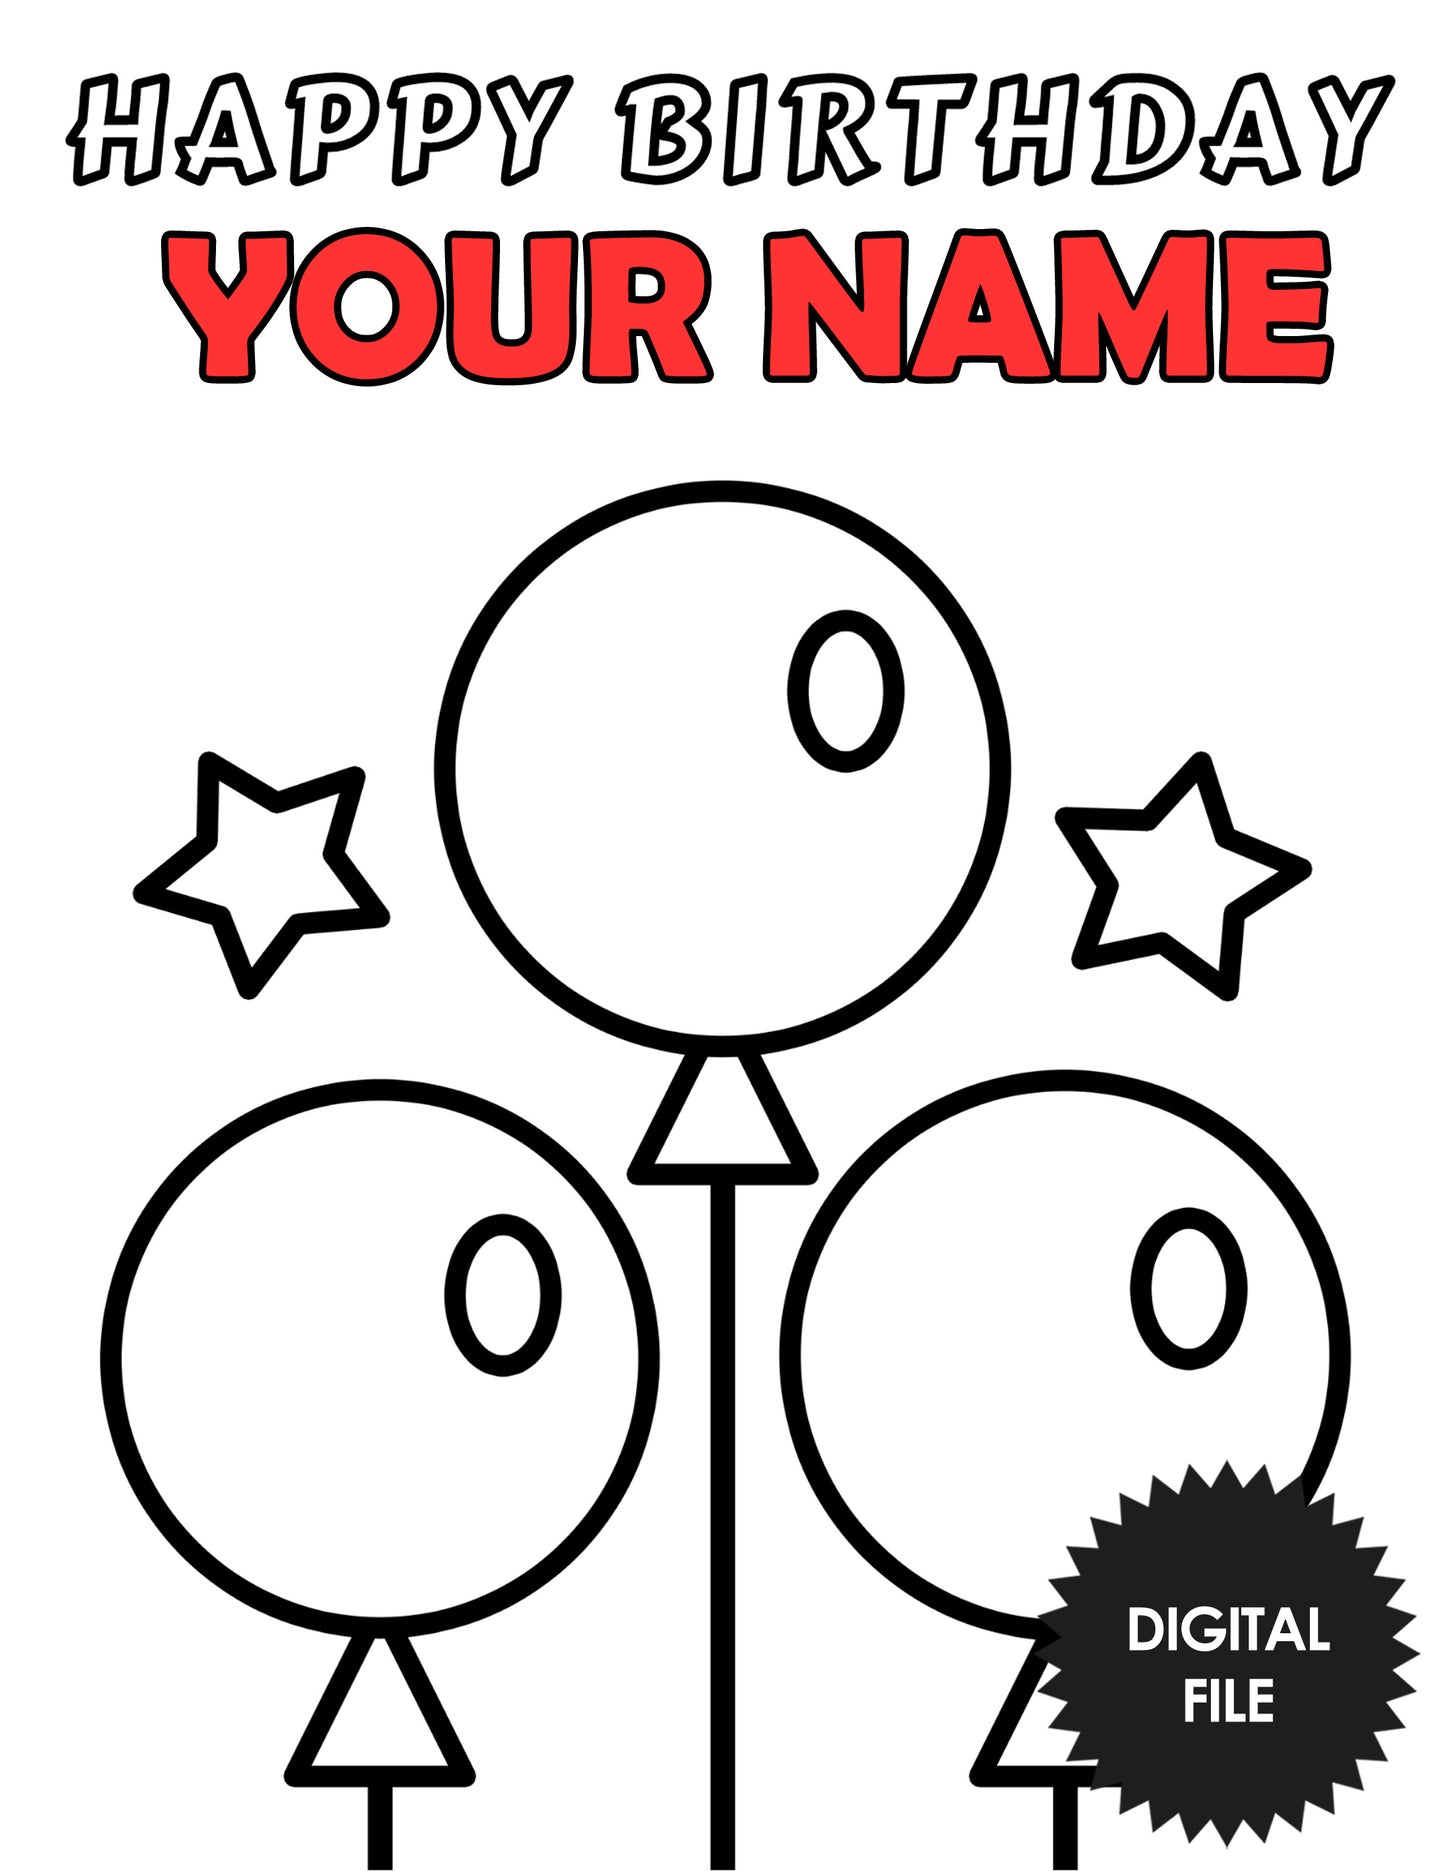 Personalized Birthday Coloring Pages For Kids and Toddlers, Birthday Gift, Very Thick Lines, Custom Name & Age, Kids Printables, 6 Pages PDF